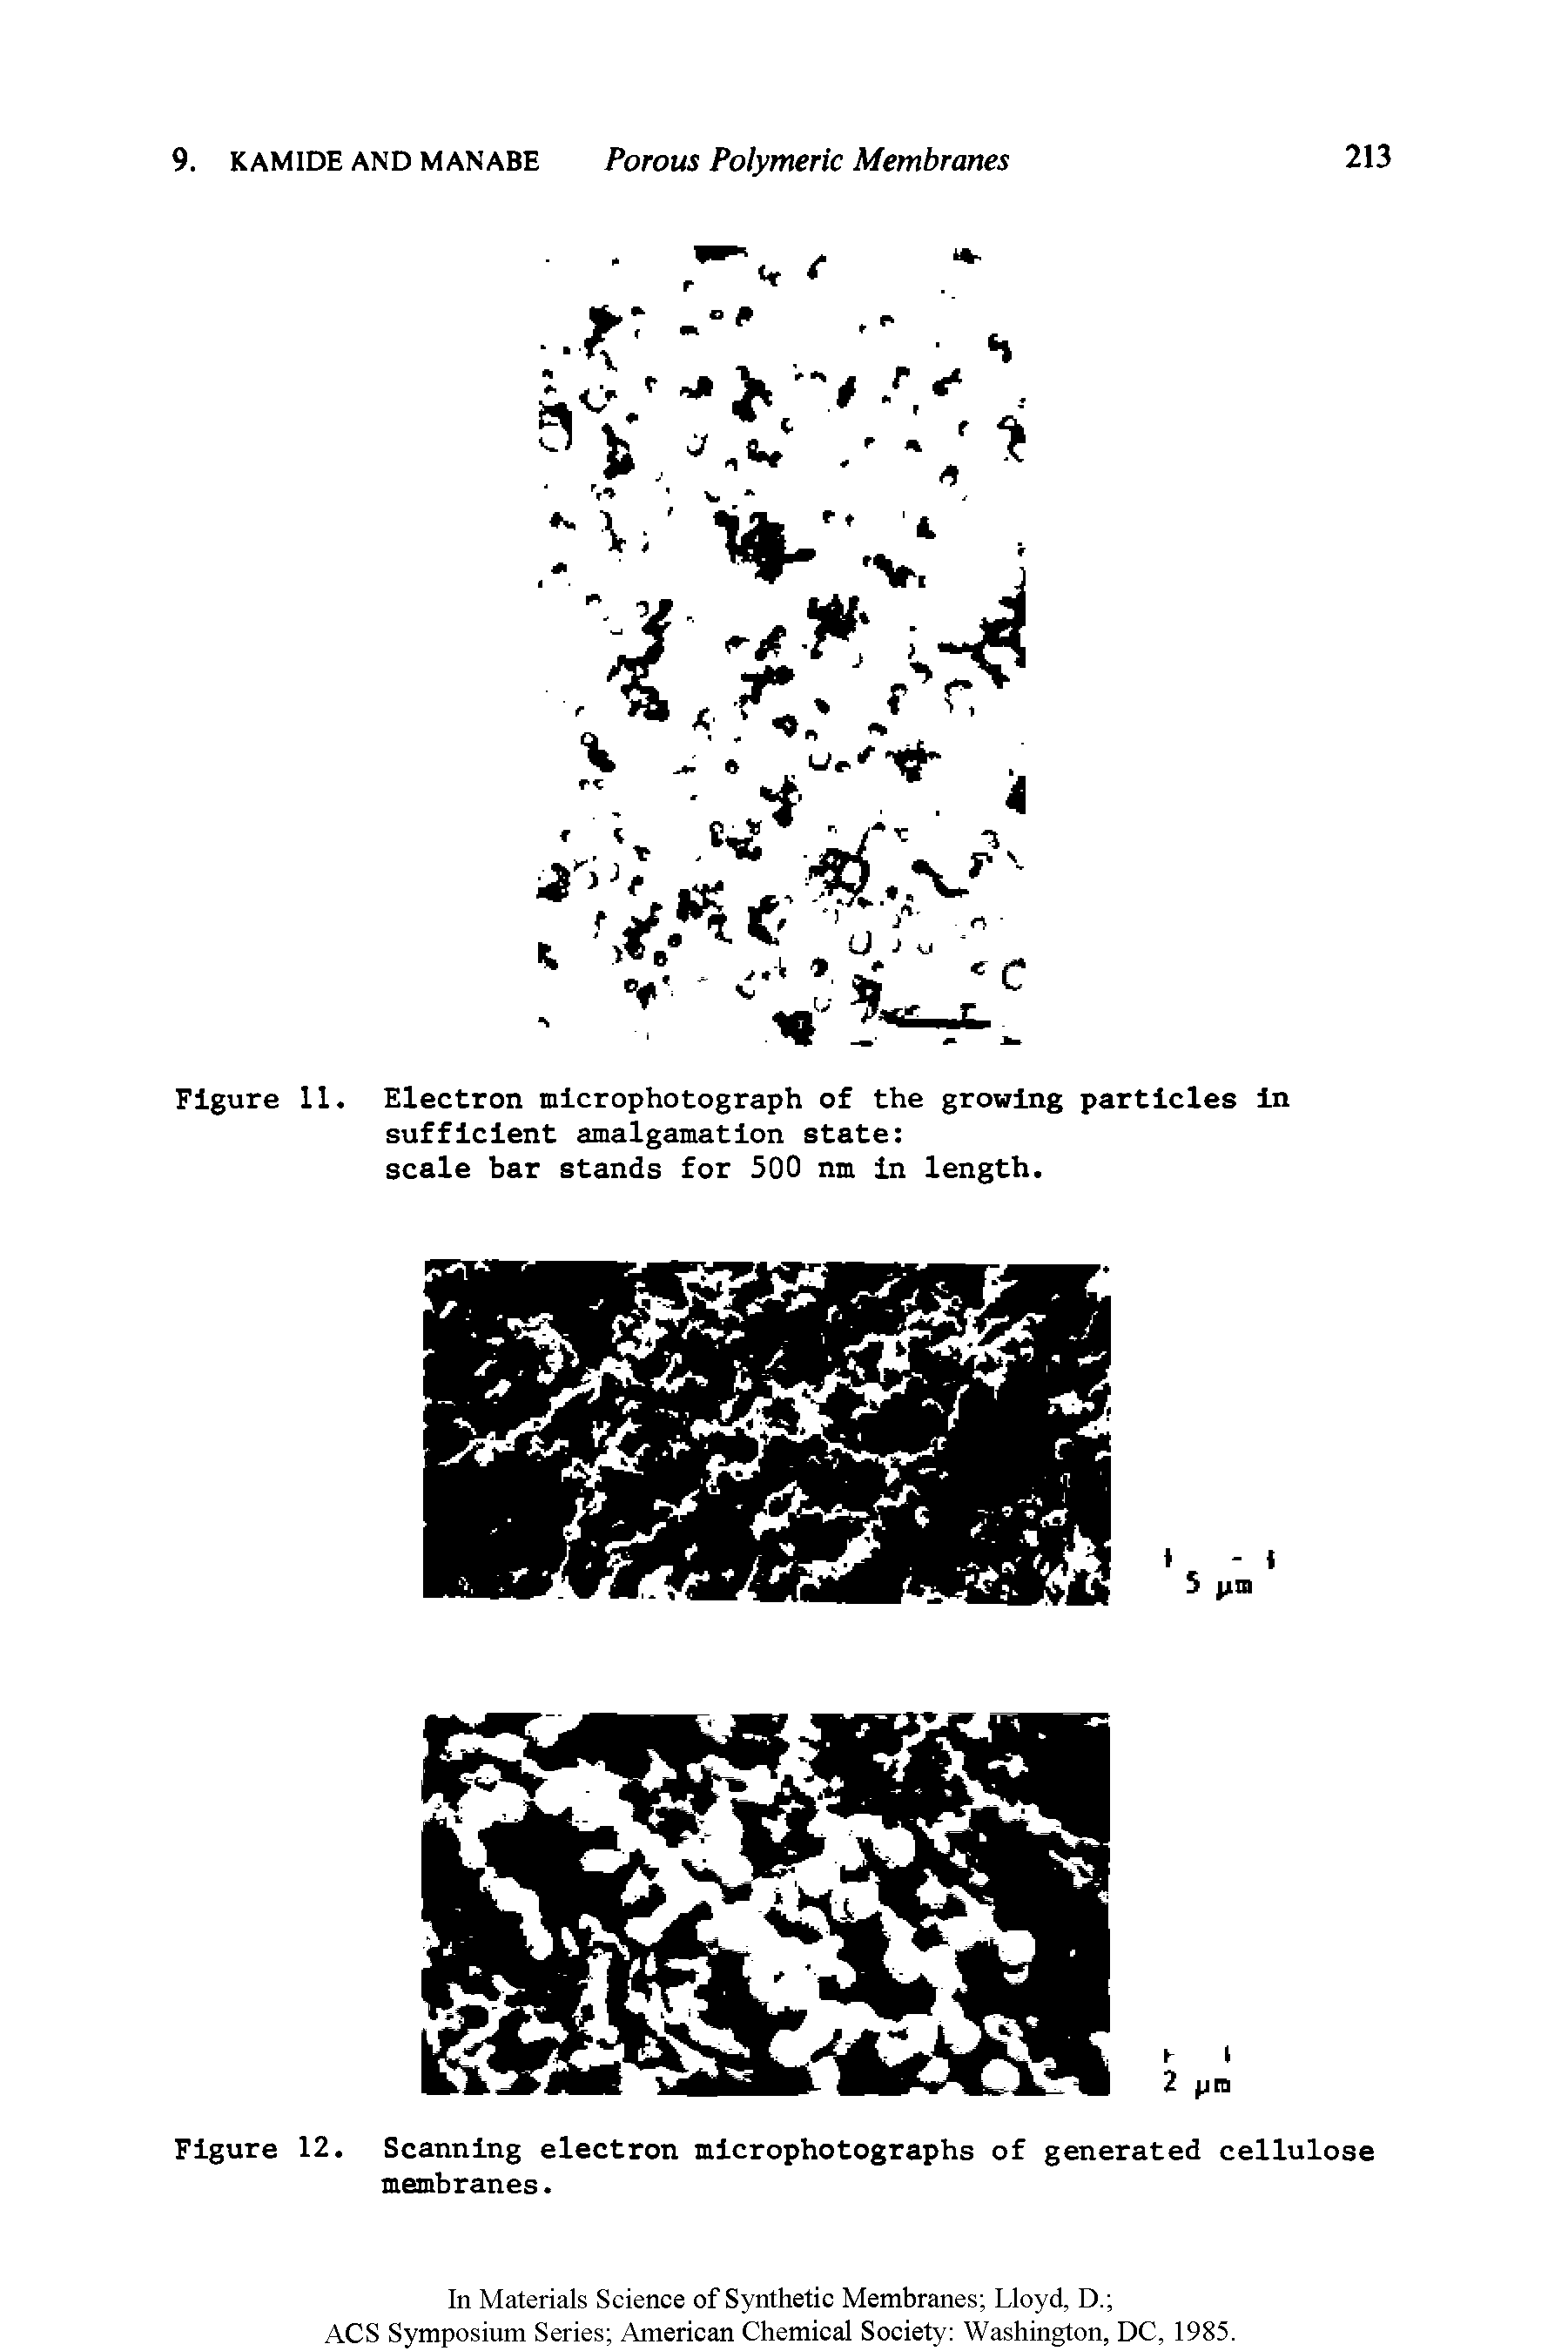 Figure 12. Scanning electron microphotographs of generated cellulose membranes.